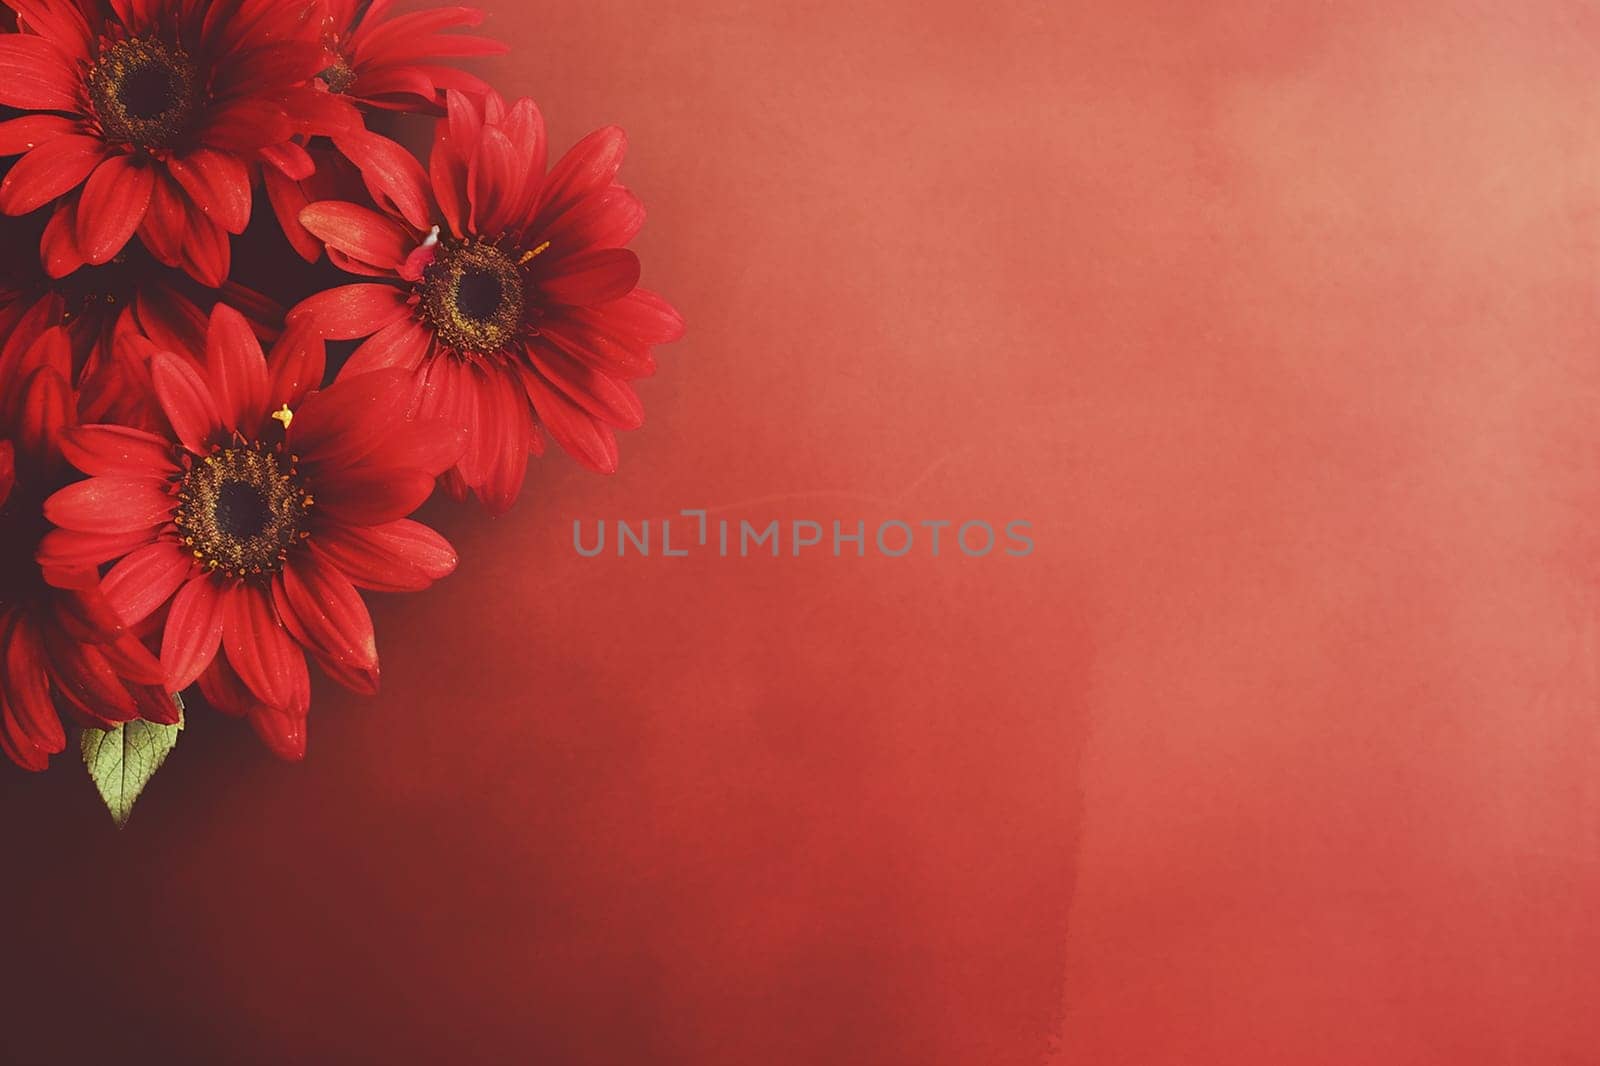 Vibrant red gerbera daisies on a textured ruby background. by Hype2art